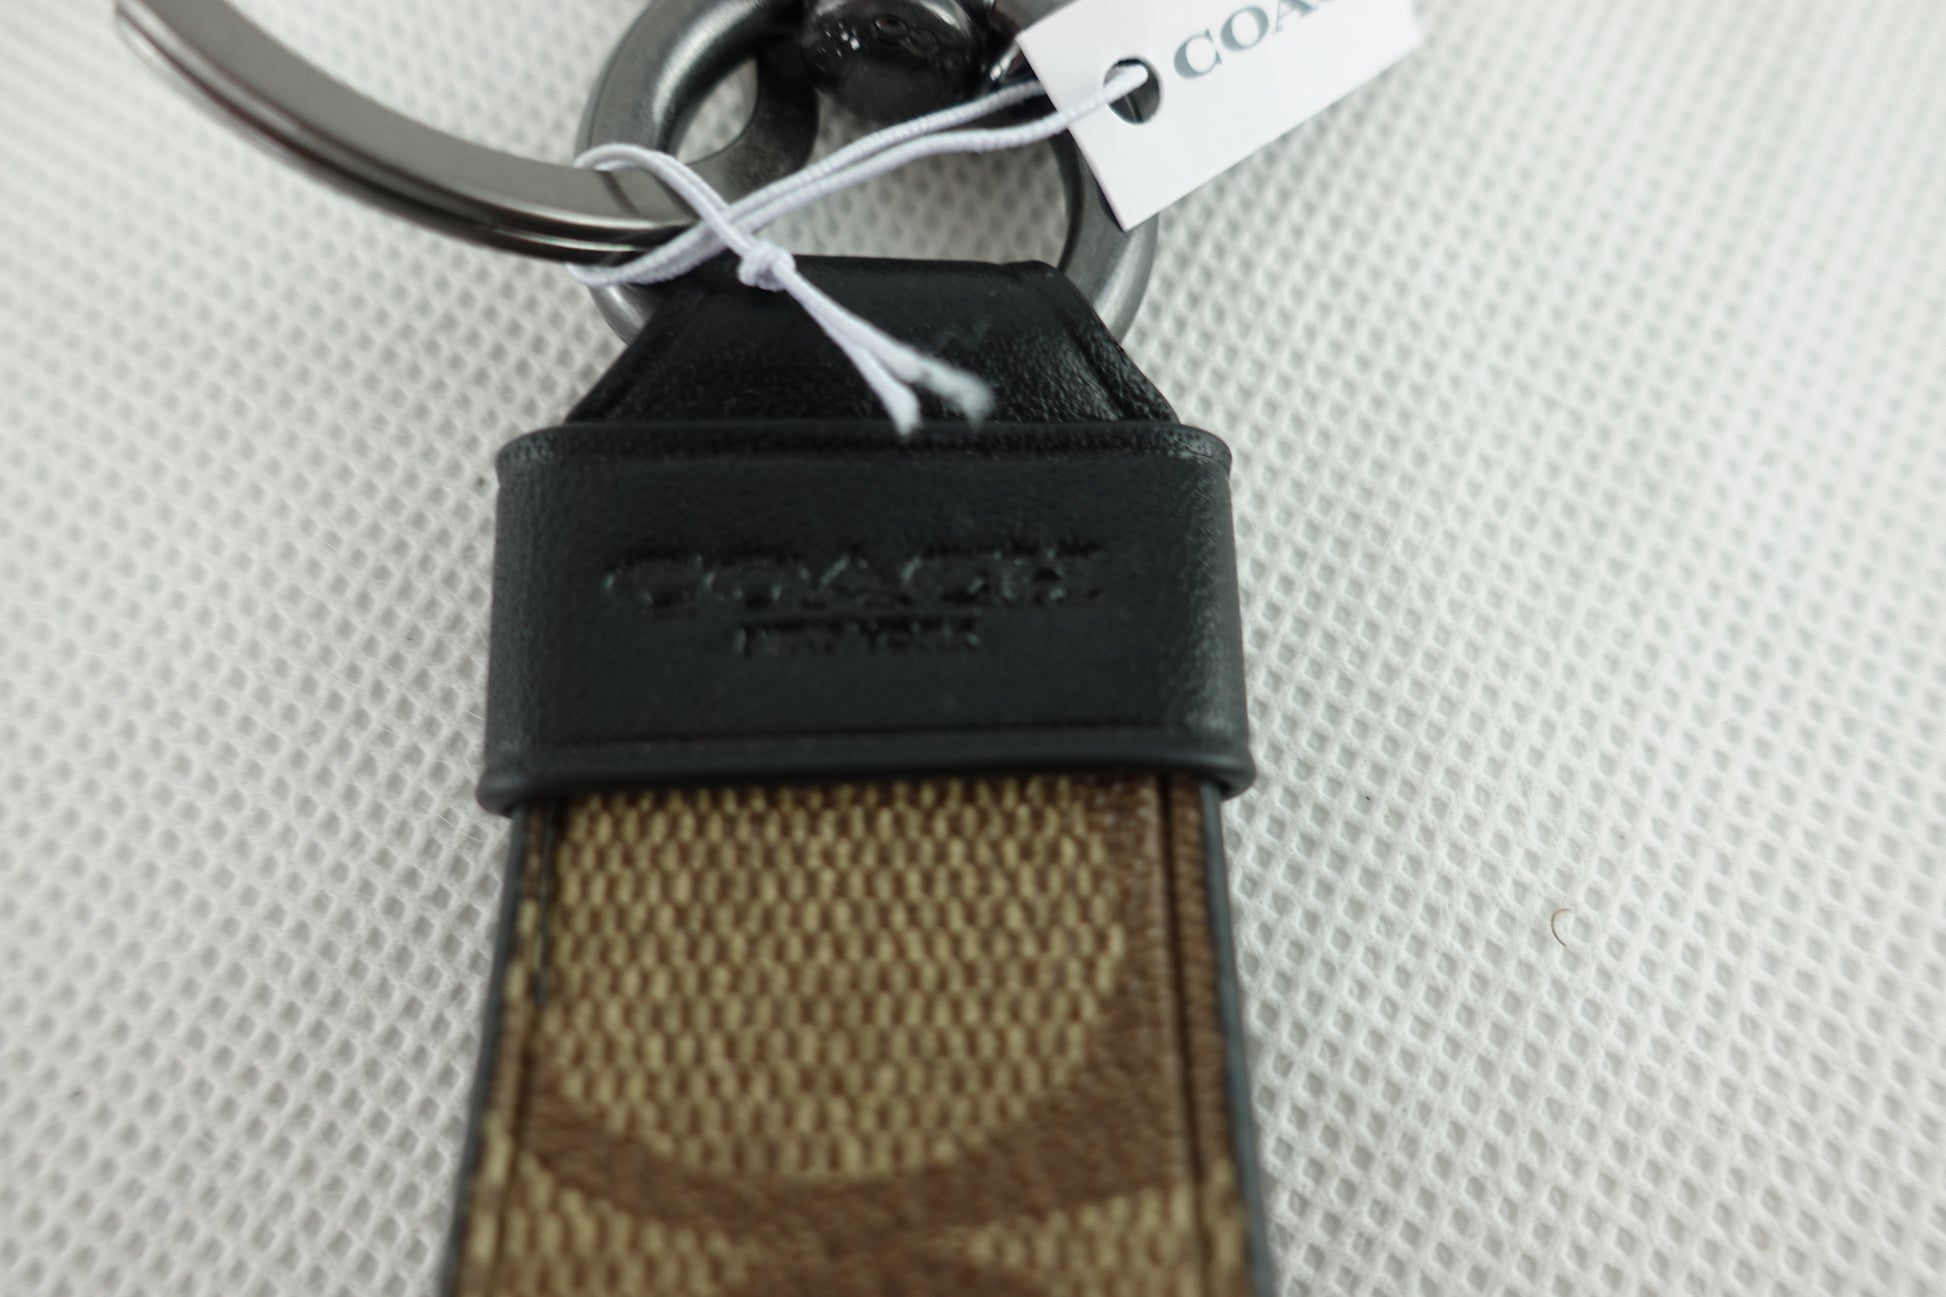 COACH® Outlet  Large Loop Key Fob In Signature Canvas